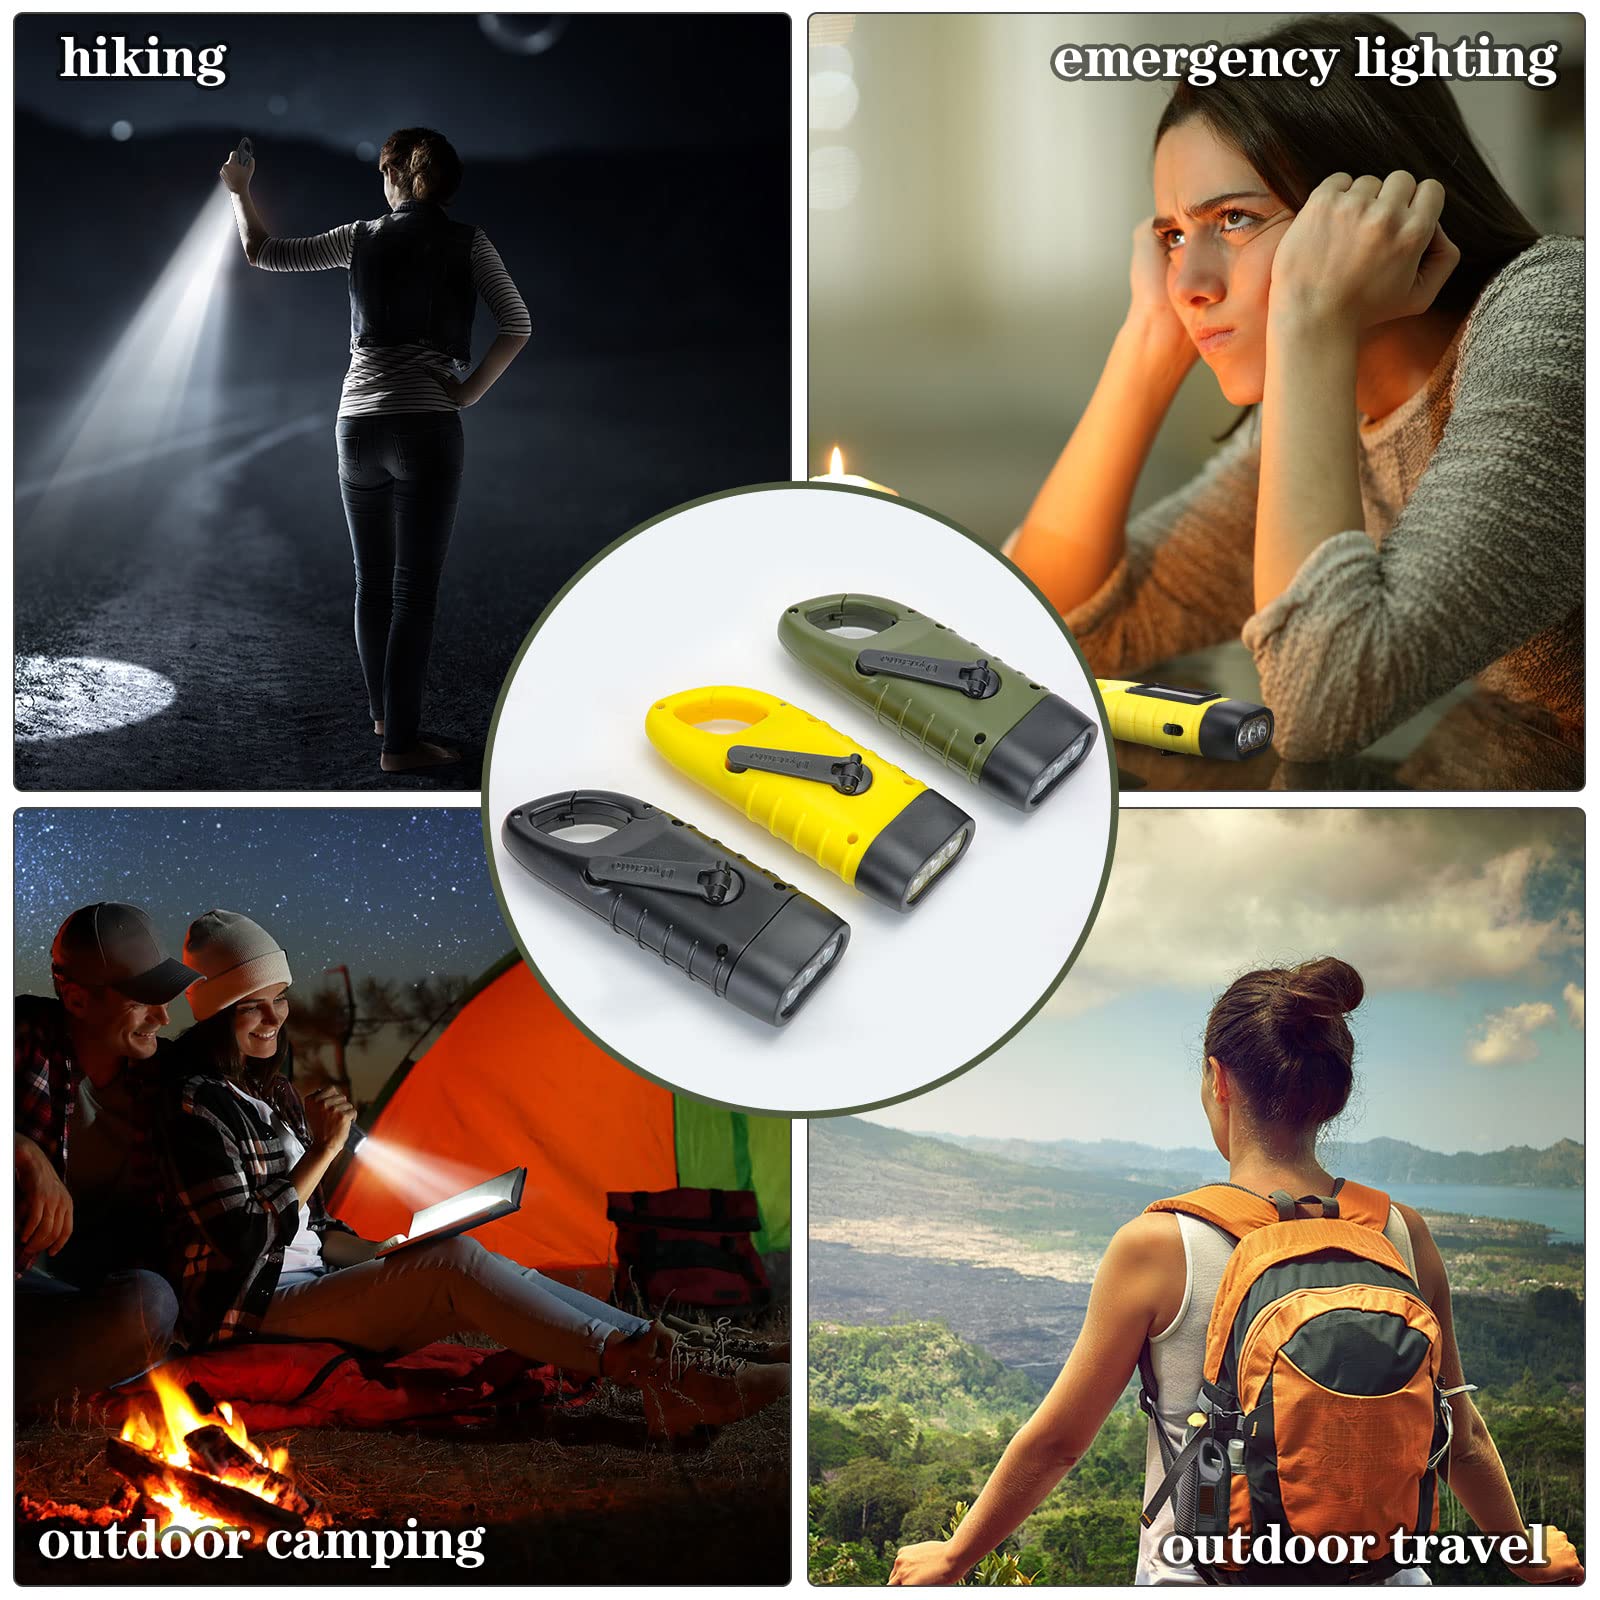 Leelosp 9 Pieces Hand Crank Solar Powered Flashlights, Emergency Rechargeable LED Flashlight Survival Flashlight Gear Self Powered Charging Torch for Outdoor Sports Hiking Camping, Green Yellow Black